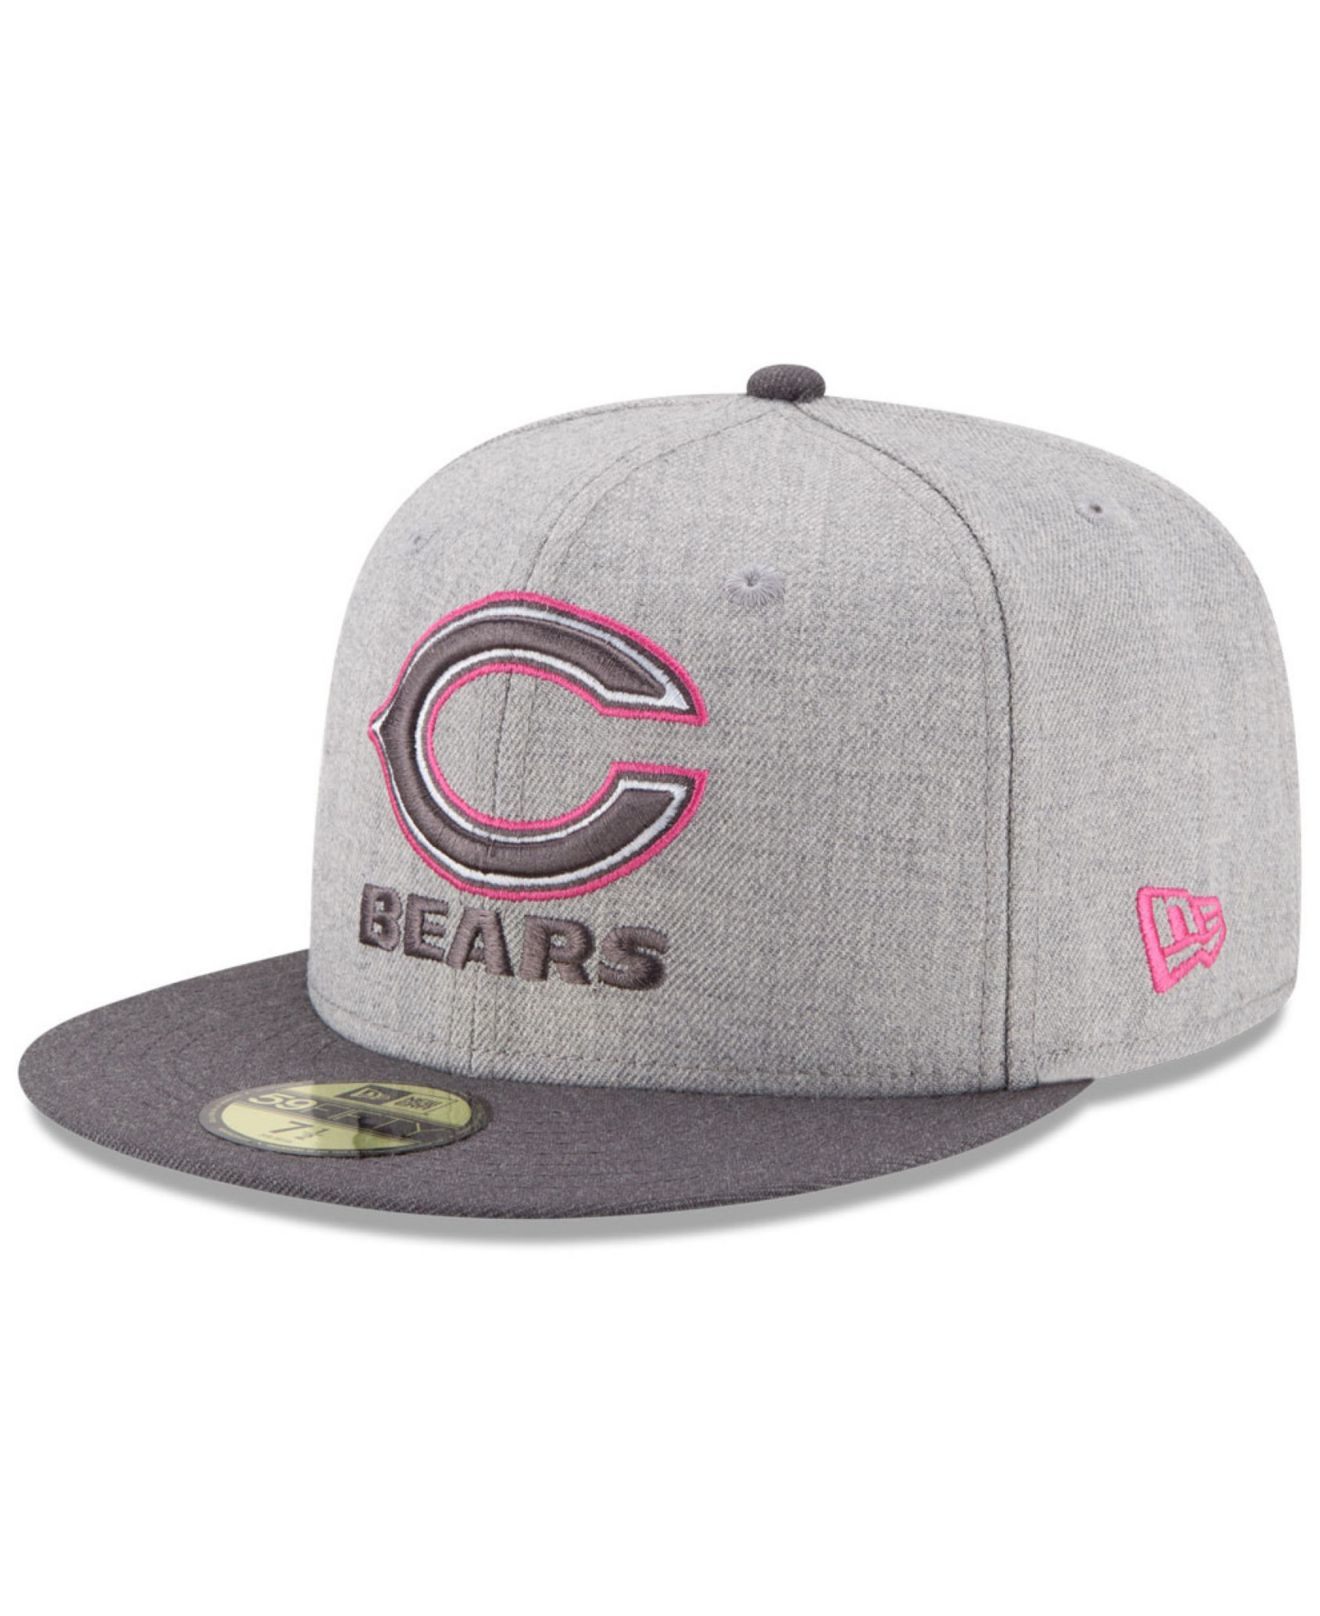 NewYork Yankees Mlb Special Design I Pink I Can! Fearless Against Breast  Cancer - Growkoc